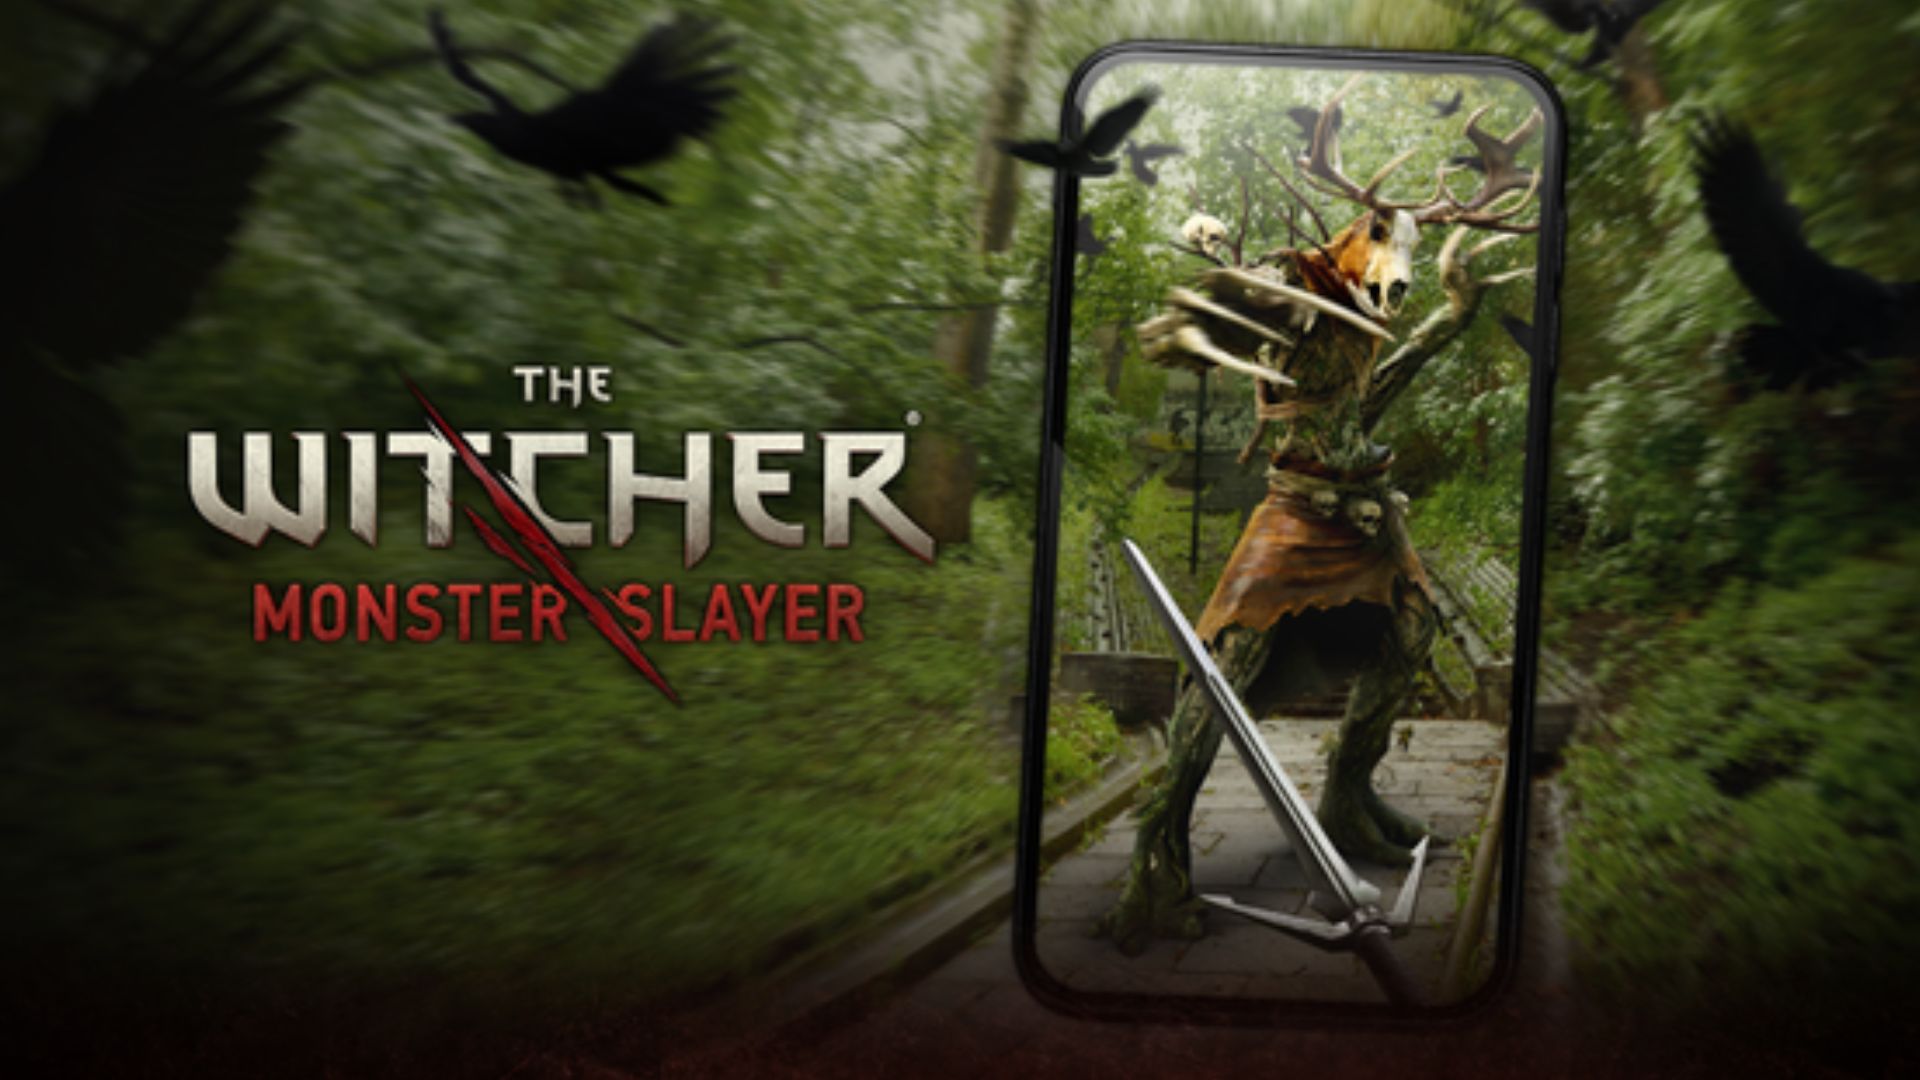 Best monster games: The Witcher: Monster Slayer. Image shows an armoured figure on a wooded background, inside a phone frame. To the left you can see the game's logo.